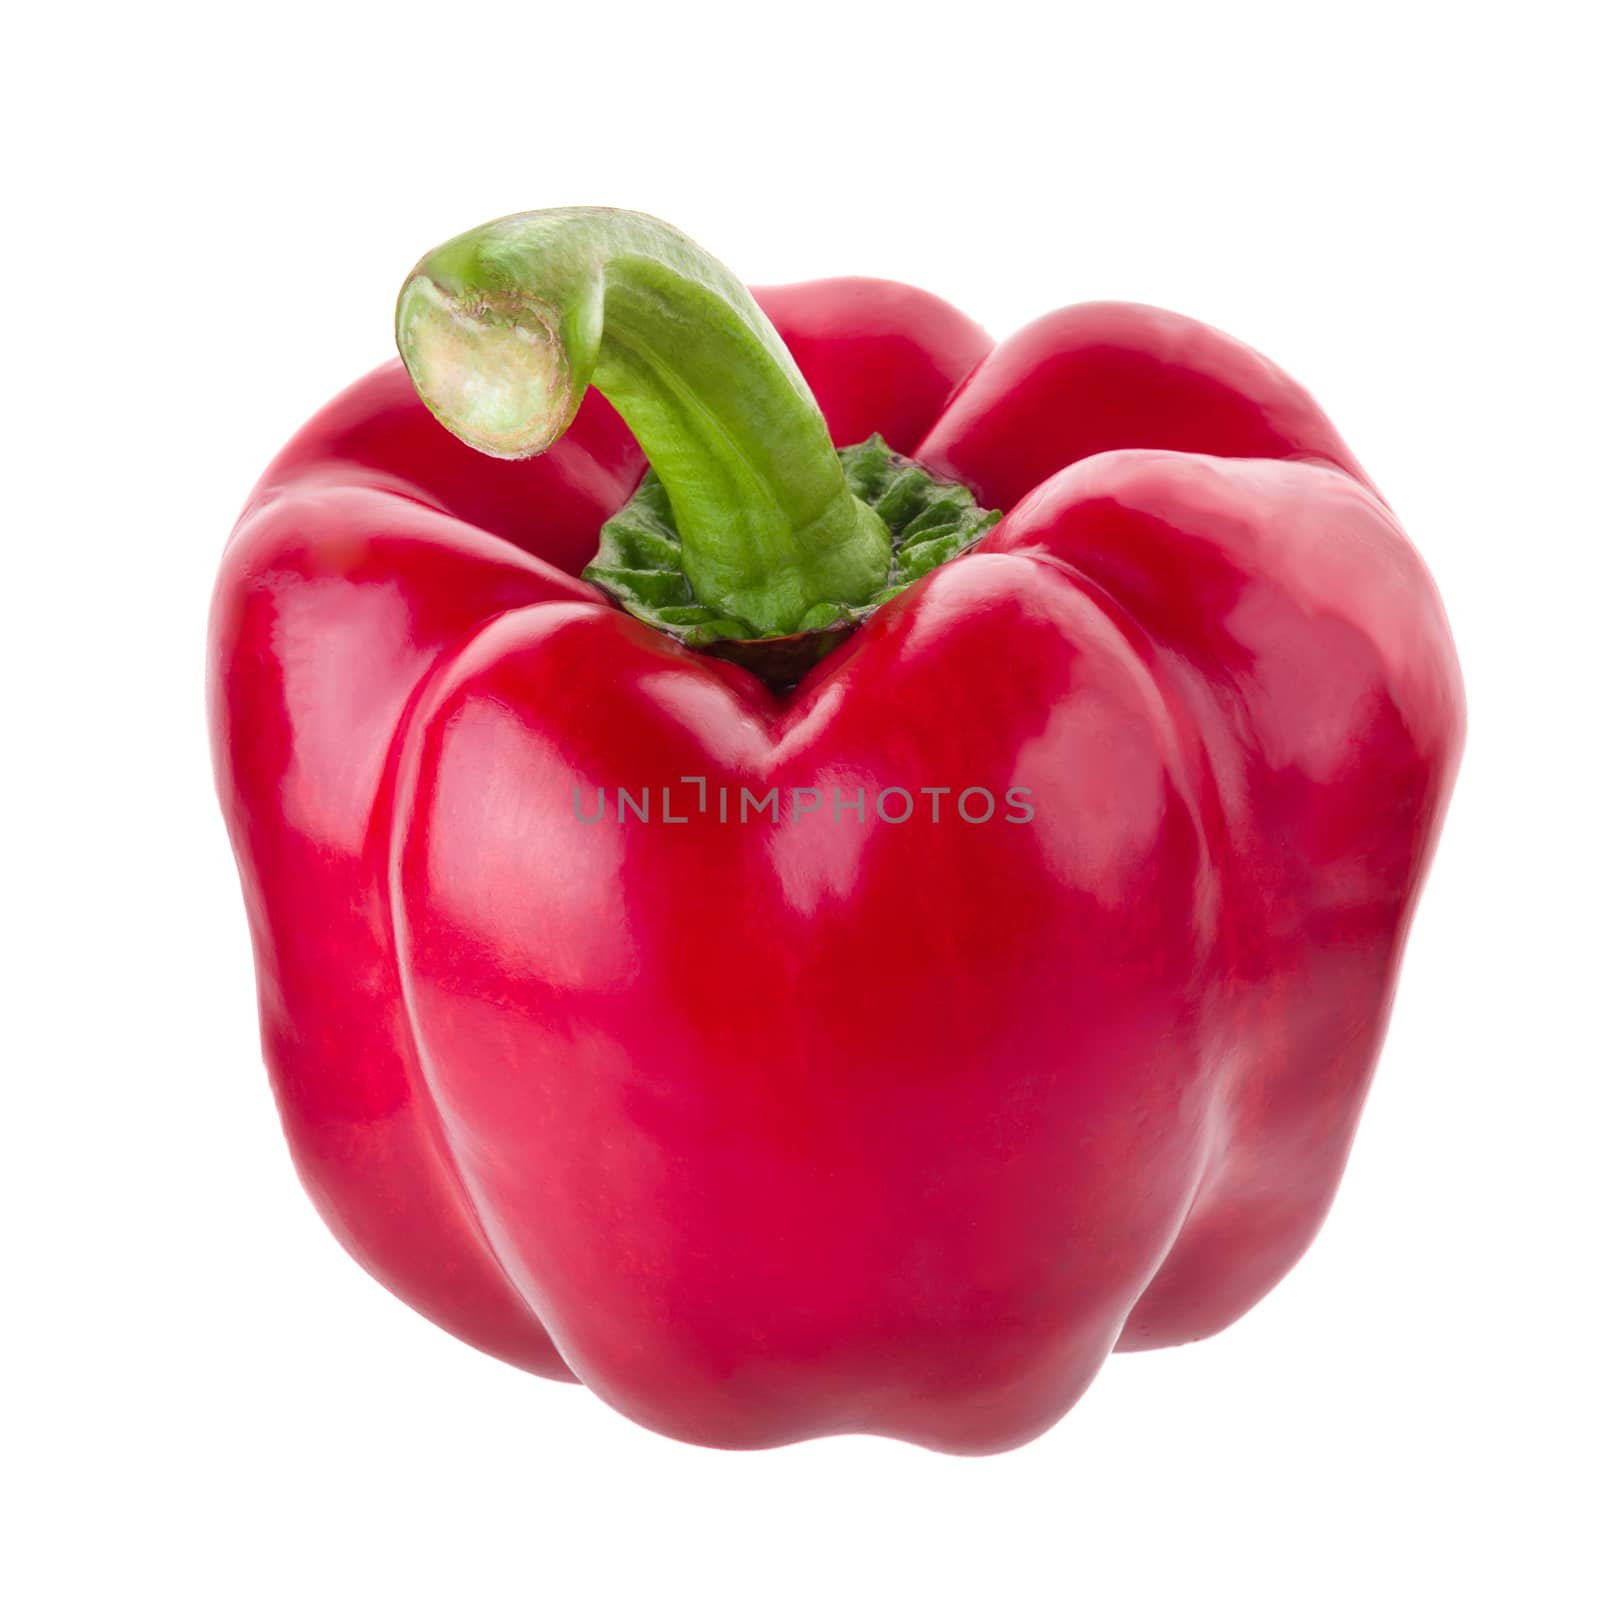 Red pepper shooted isolated on a white background.